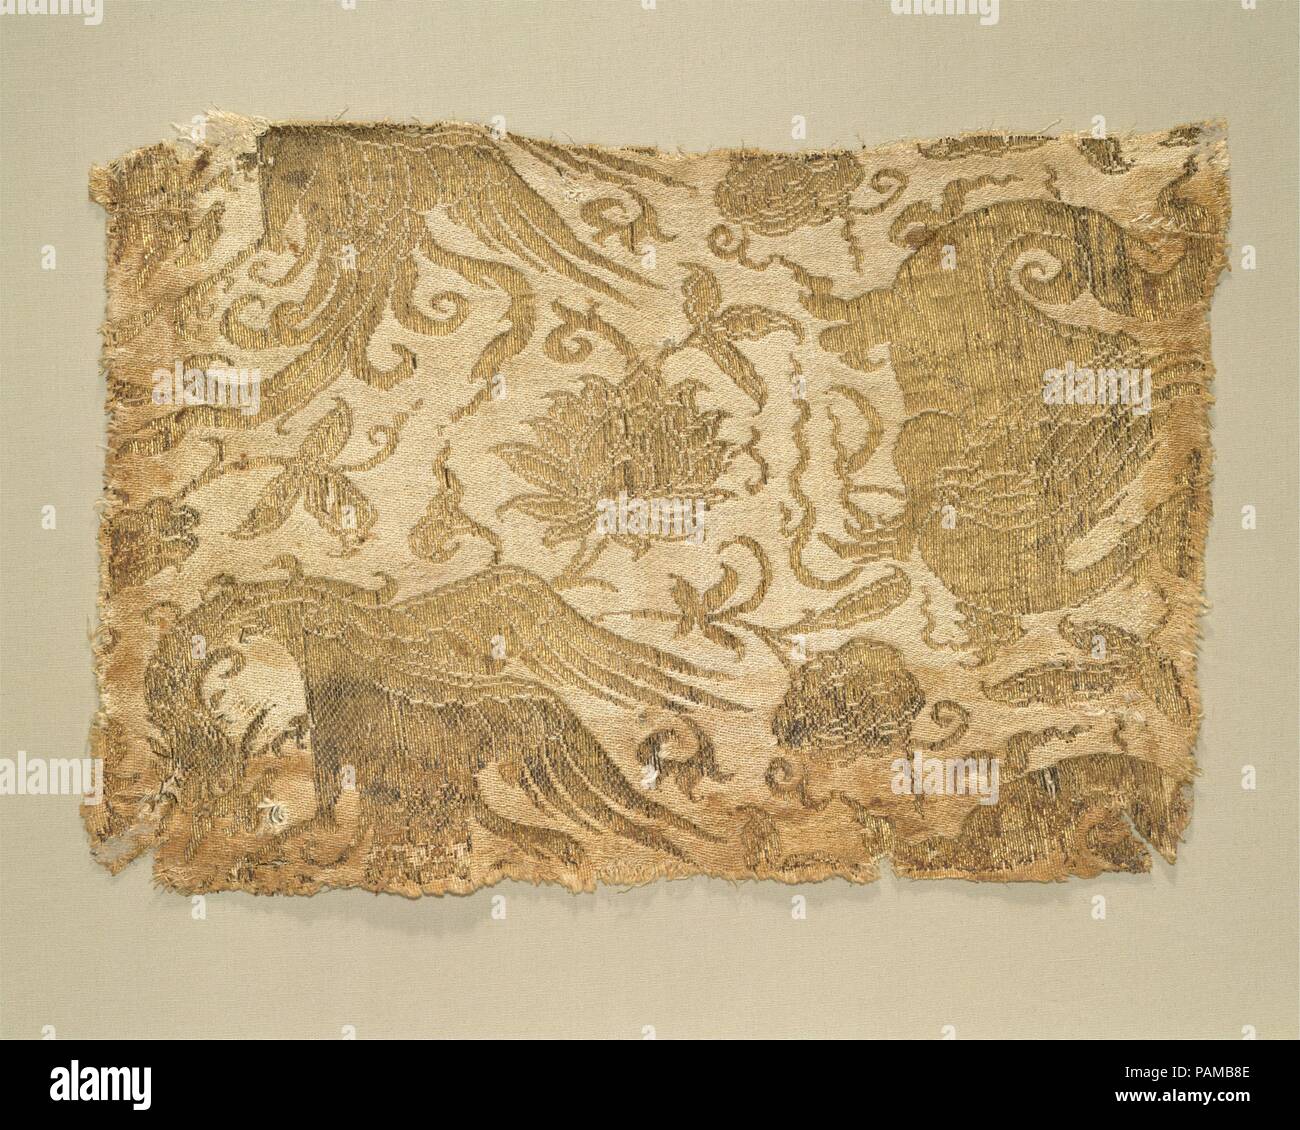 Textile with Phoenix, Winged Animal and Flowers. Culture: Central Asia. Dimensions: 9 5/16 x 6 1/2 in. (23.7 x 16.5 cm). Date: 13th-early 14th century.  Few silks better represent the imagination and vitality of Central Asian textiles of the Mongol period than this piece, with its angry birds and strange, incomplete winged beasts against an airy floral background. Other Central Asian textiles of this type survive in European church treasuries and show dynamic interactions among the various imaginary creatures of their patterns. Such designs had a strong effect on fourteenth- to fifteenth-centu Stock Photo